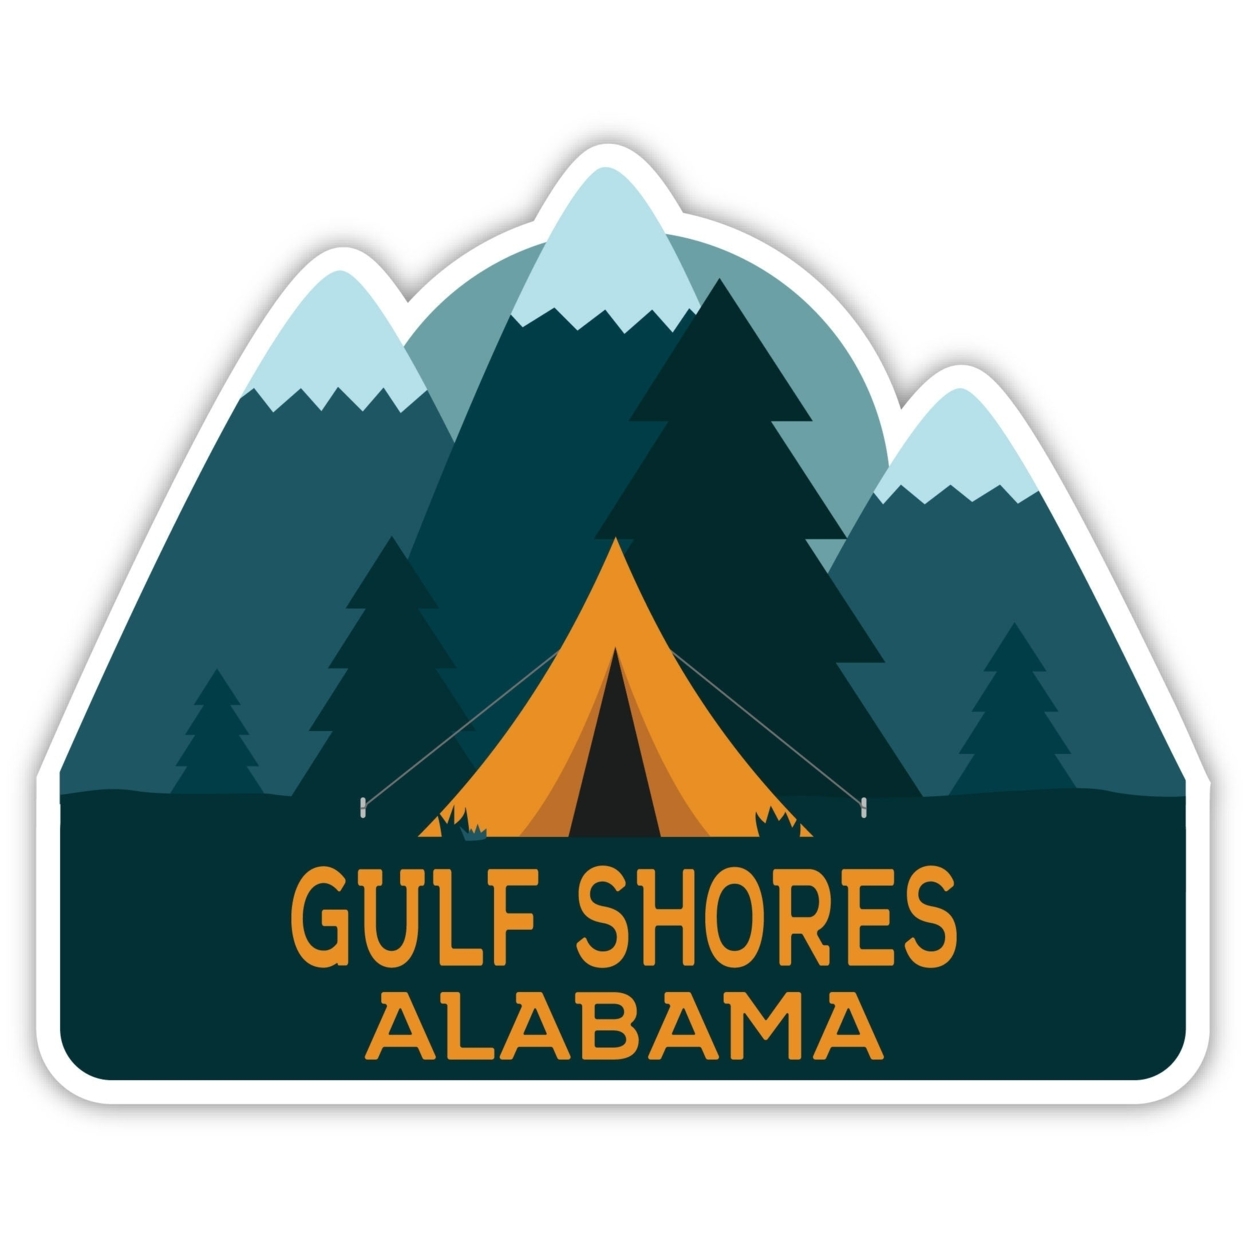 Gulf Shores Alabama Souvenir Decorative Stickers (Choose Theme And Size) - Single Unit, 12-Inch, Great Outdoors